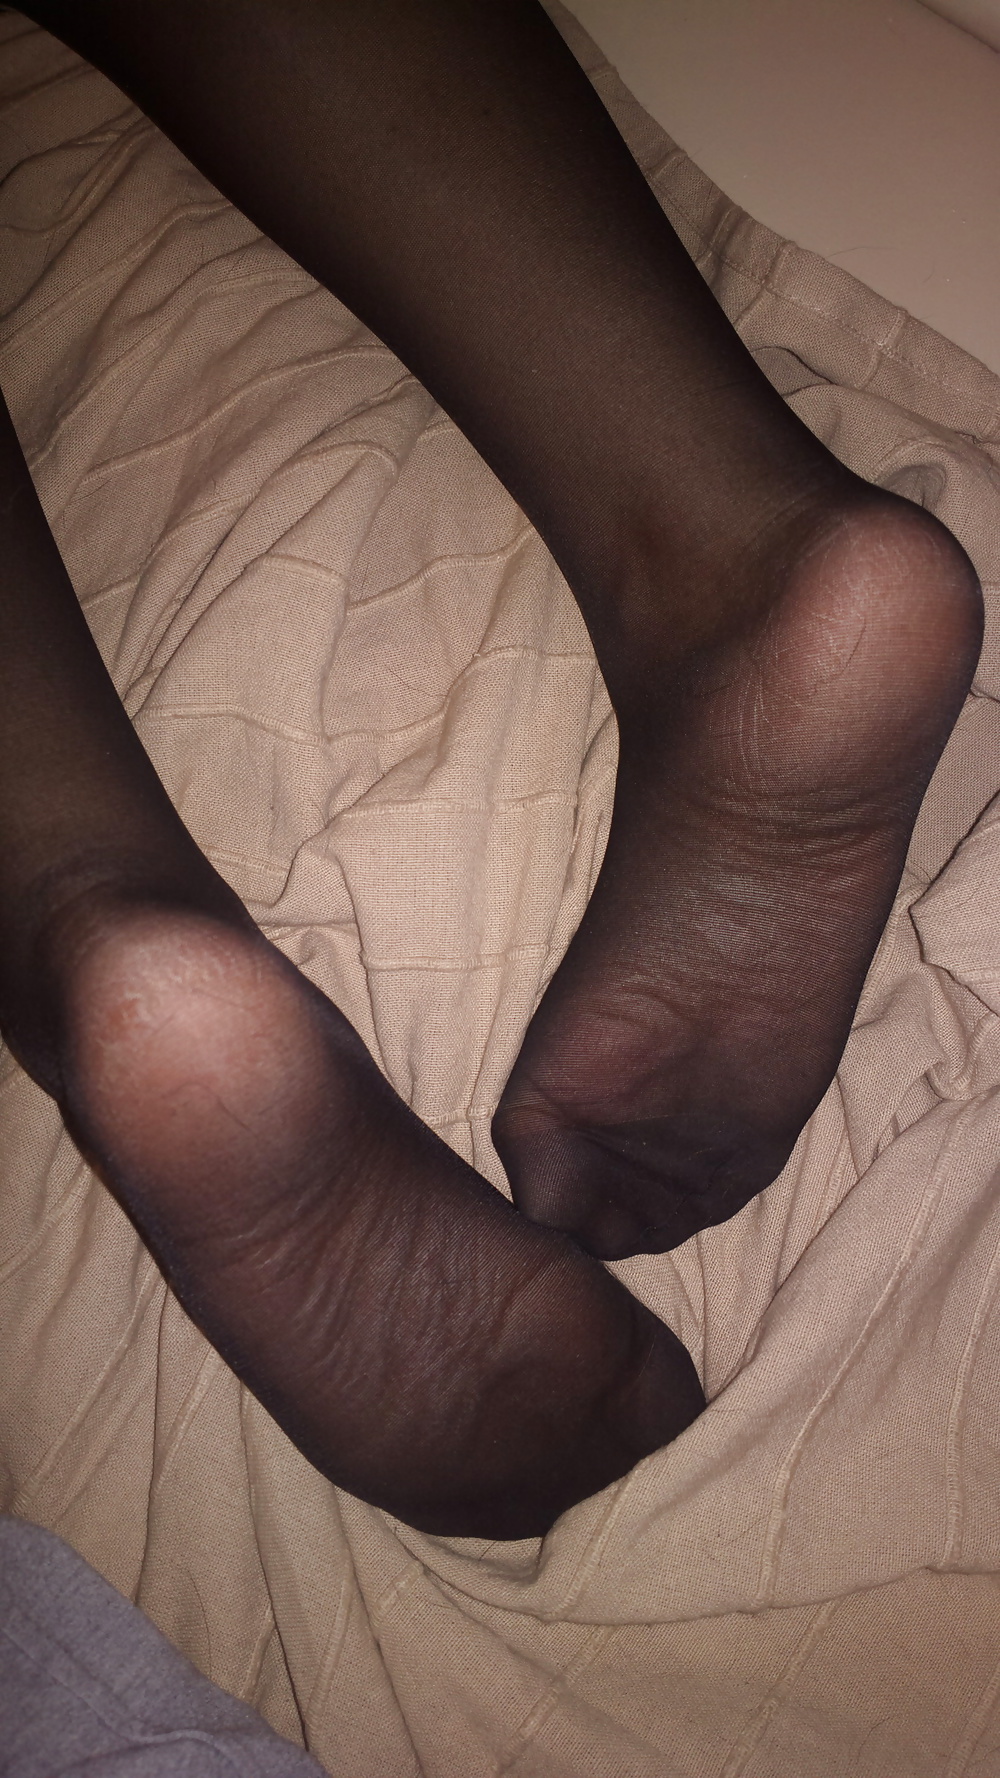 Soles and toes (5/9)